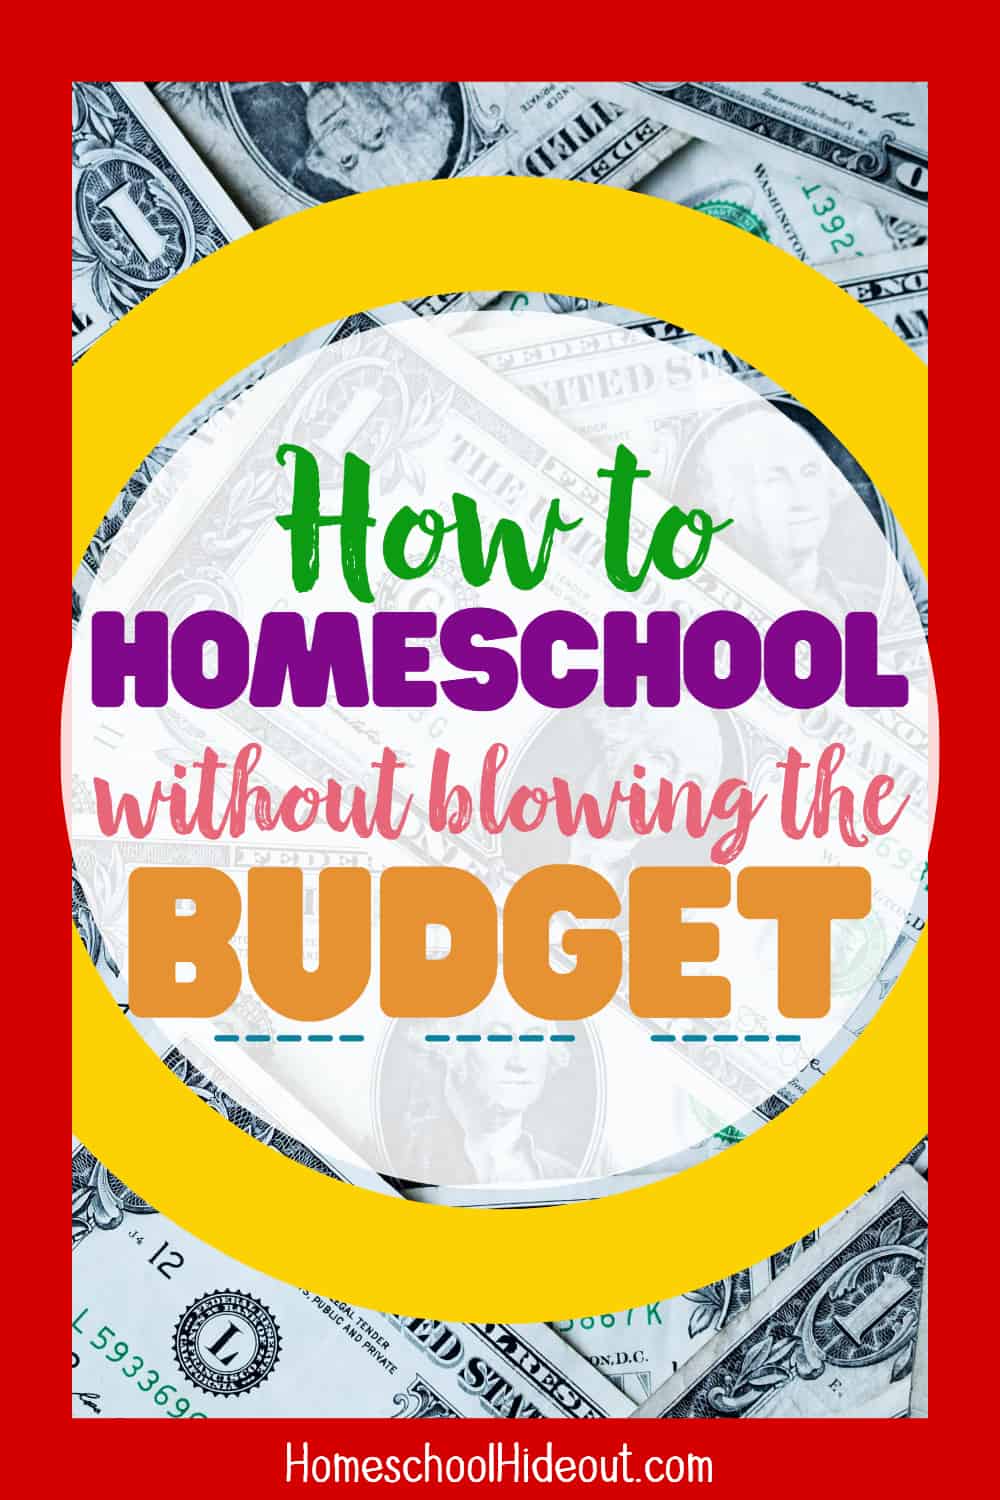 UGH! I'm trying to homeschool without blowing the budget but it's hard! These tips are good. I never thought of some of these.